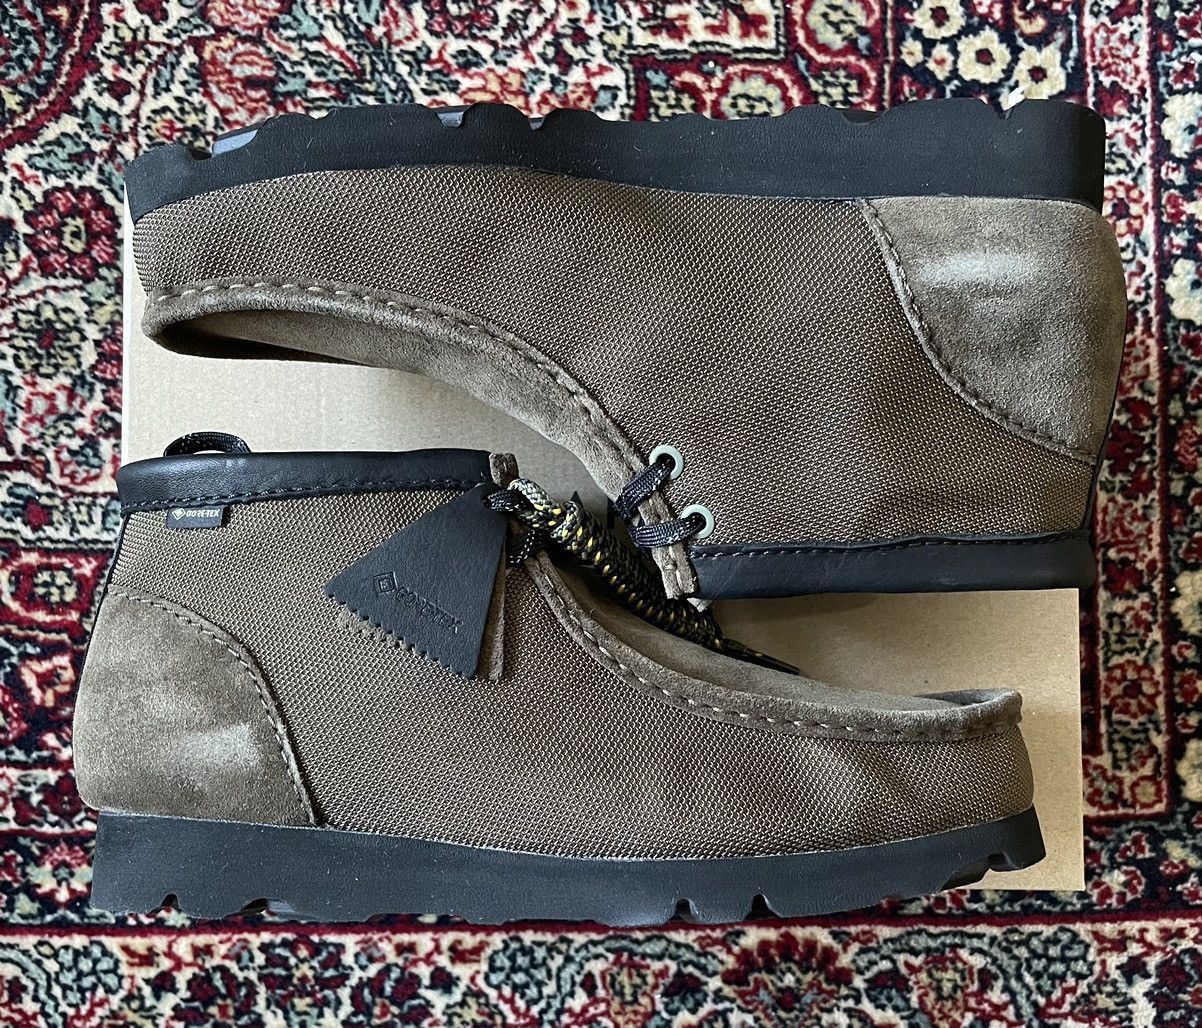 Clarks Clarks Wallabee Boot GTX Olive Textile 9 | Grailed